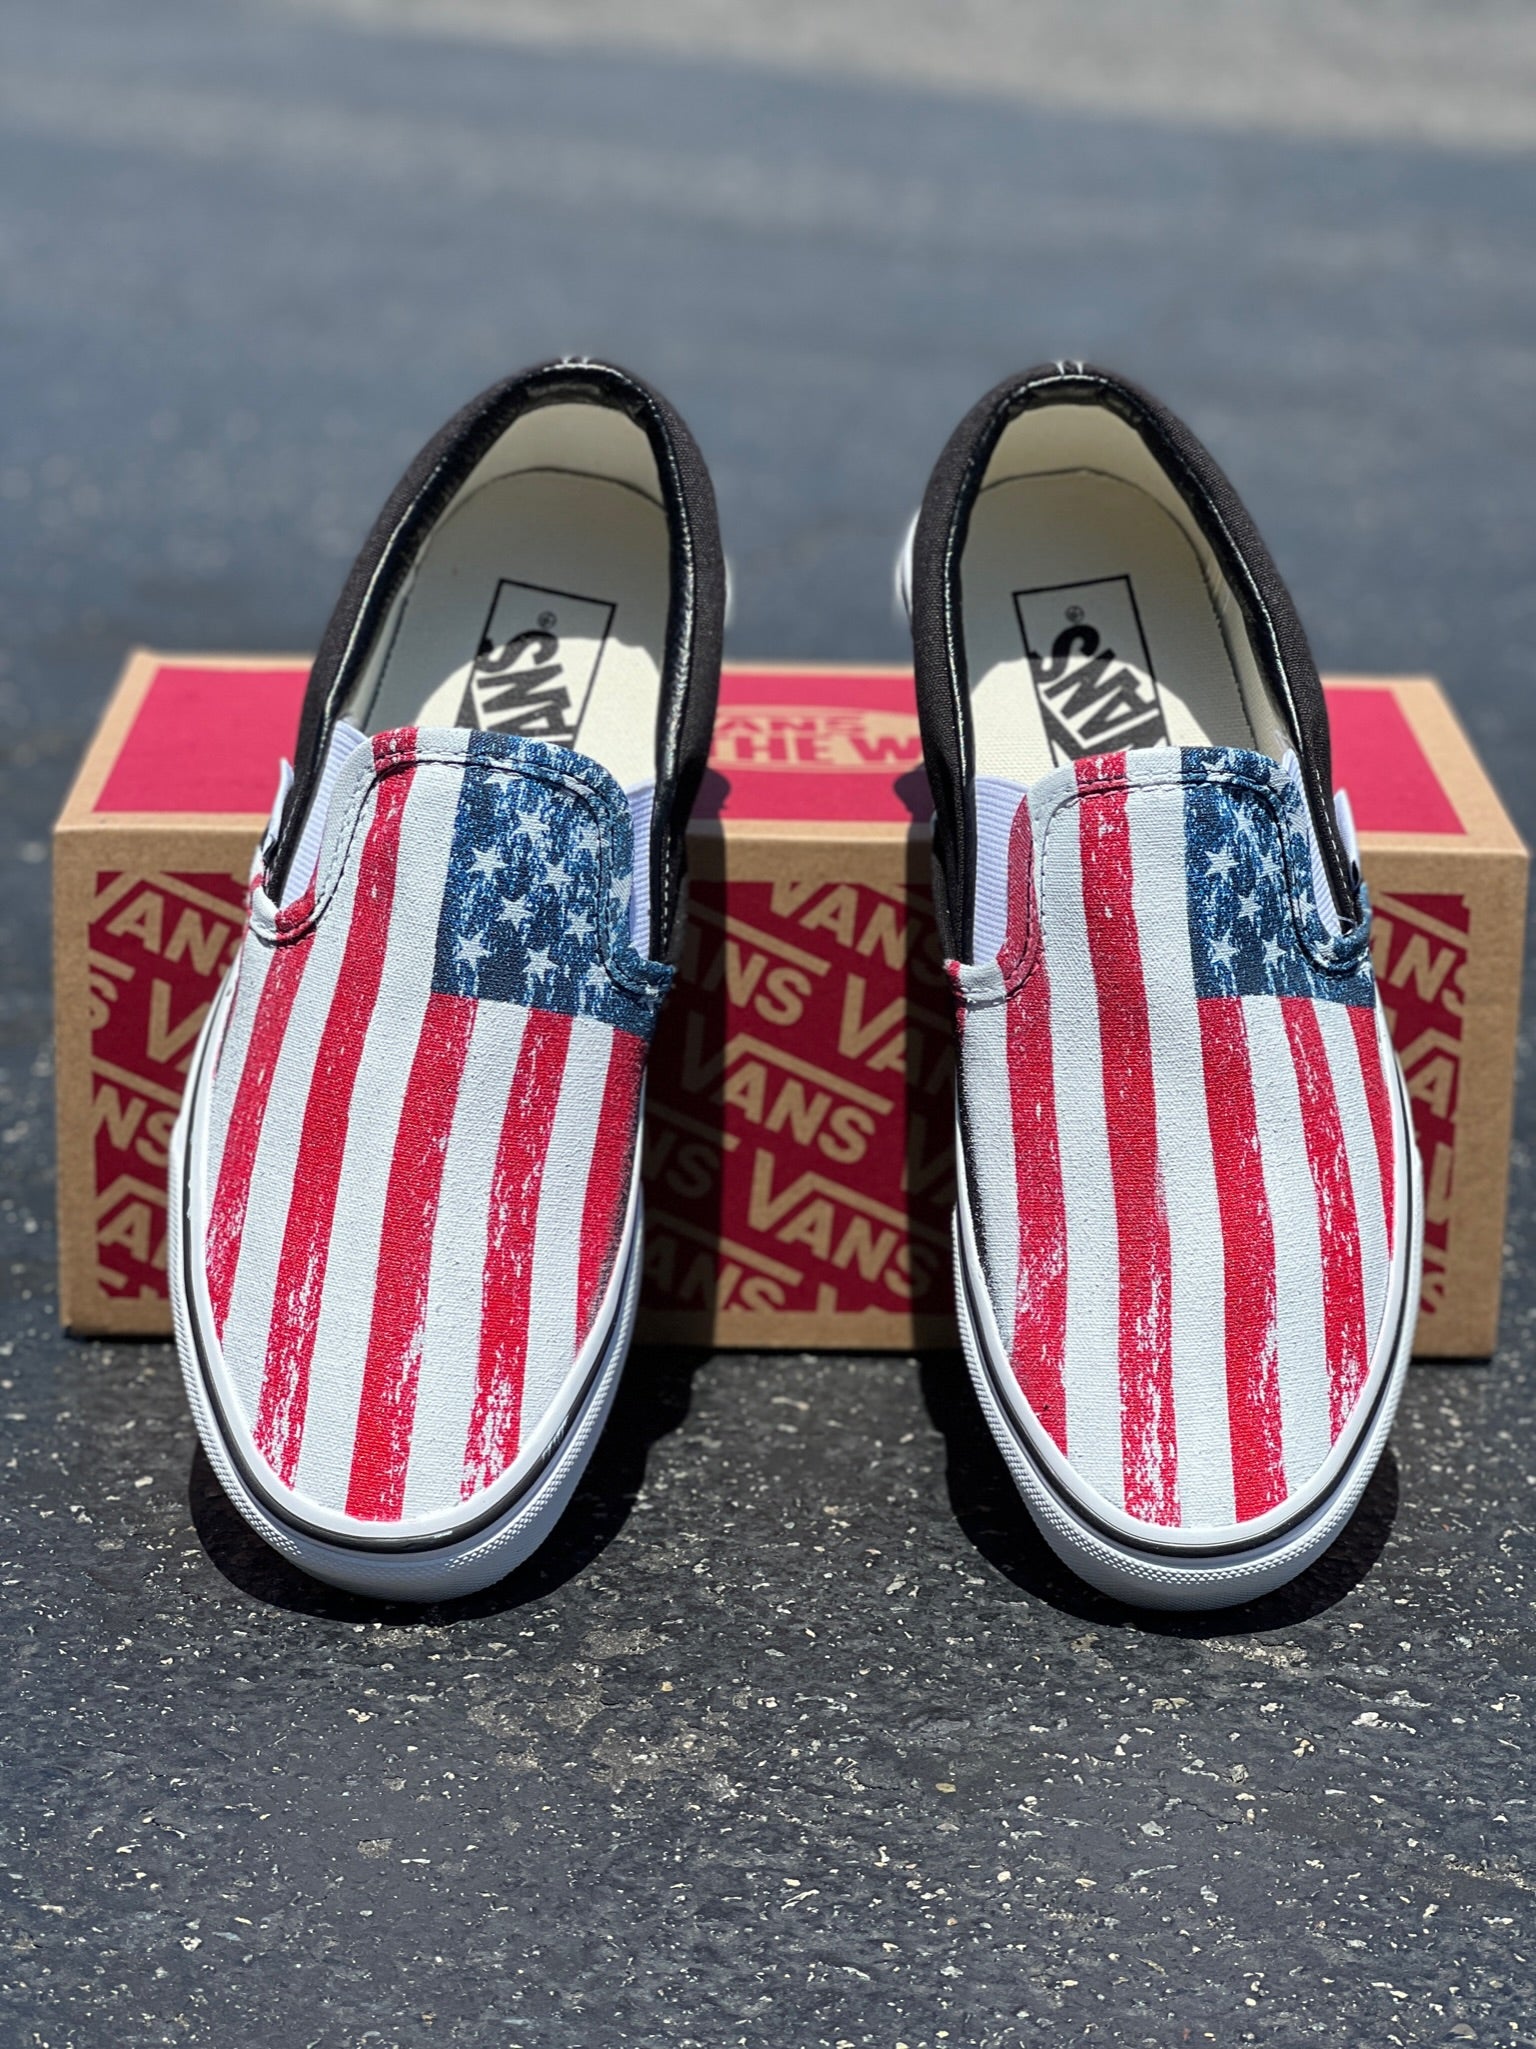 How to make American Flag Shoes - It's Always Autumn